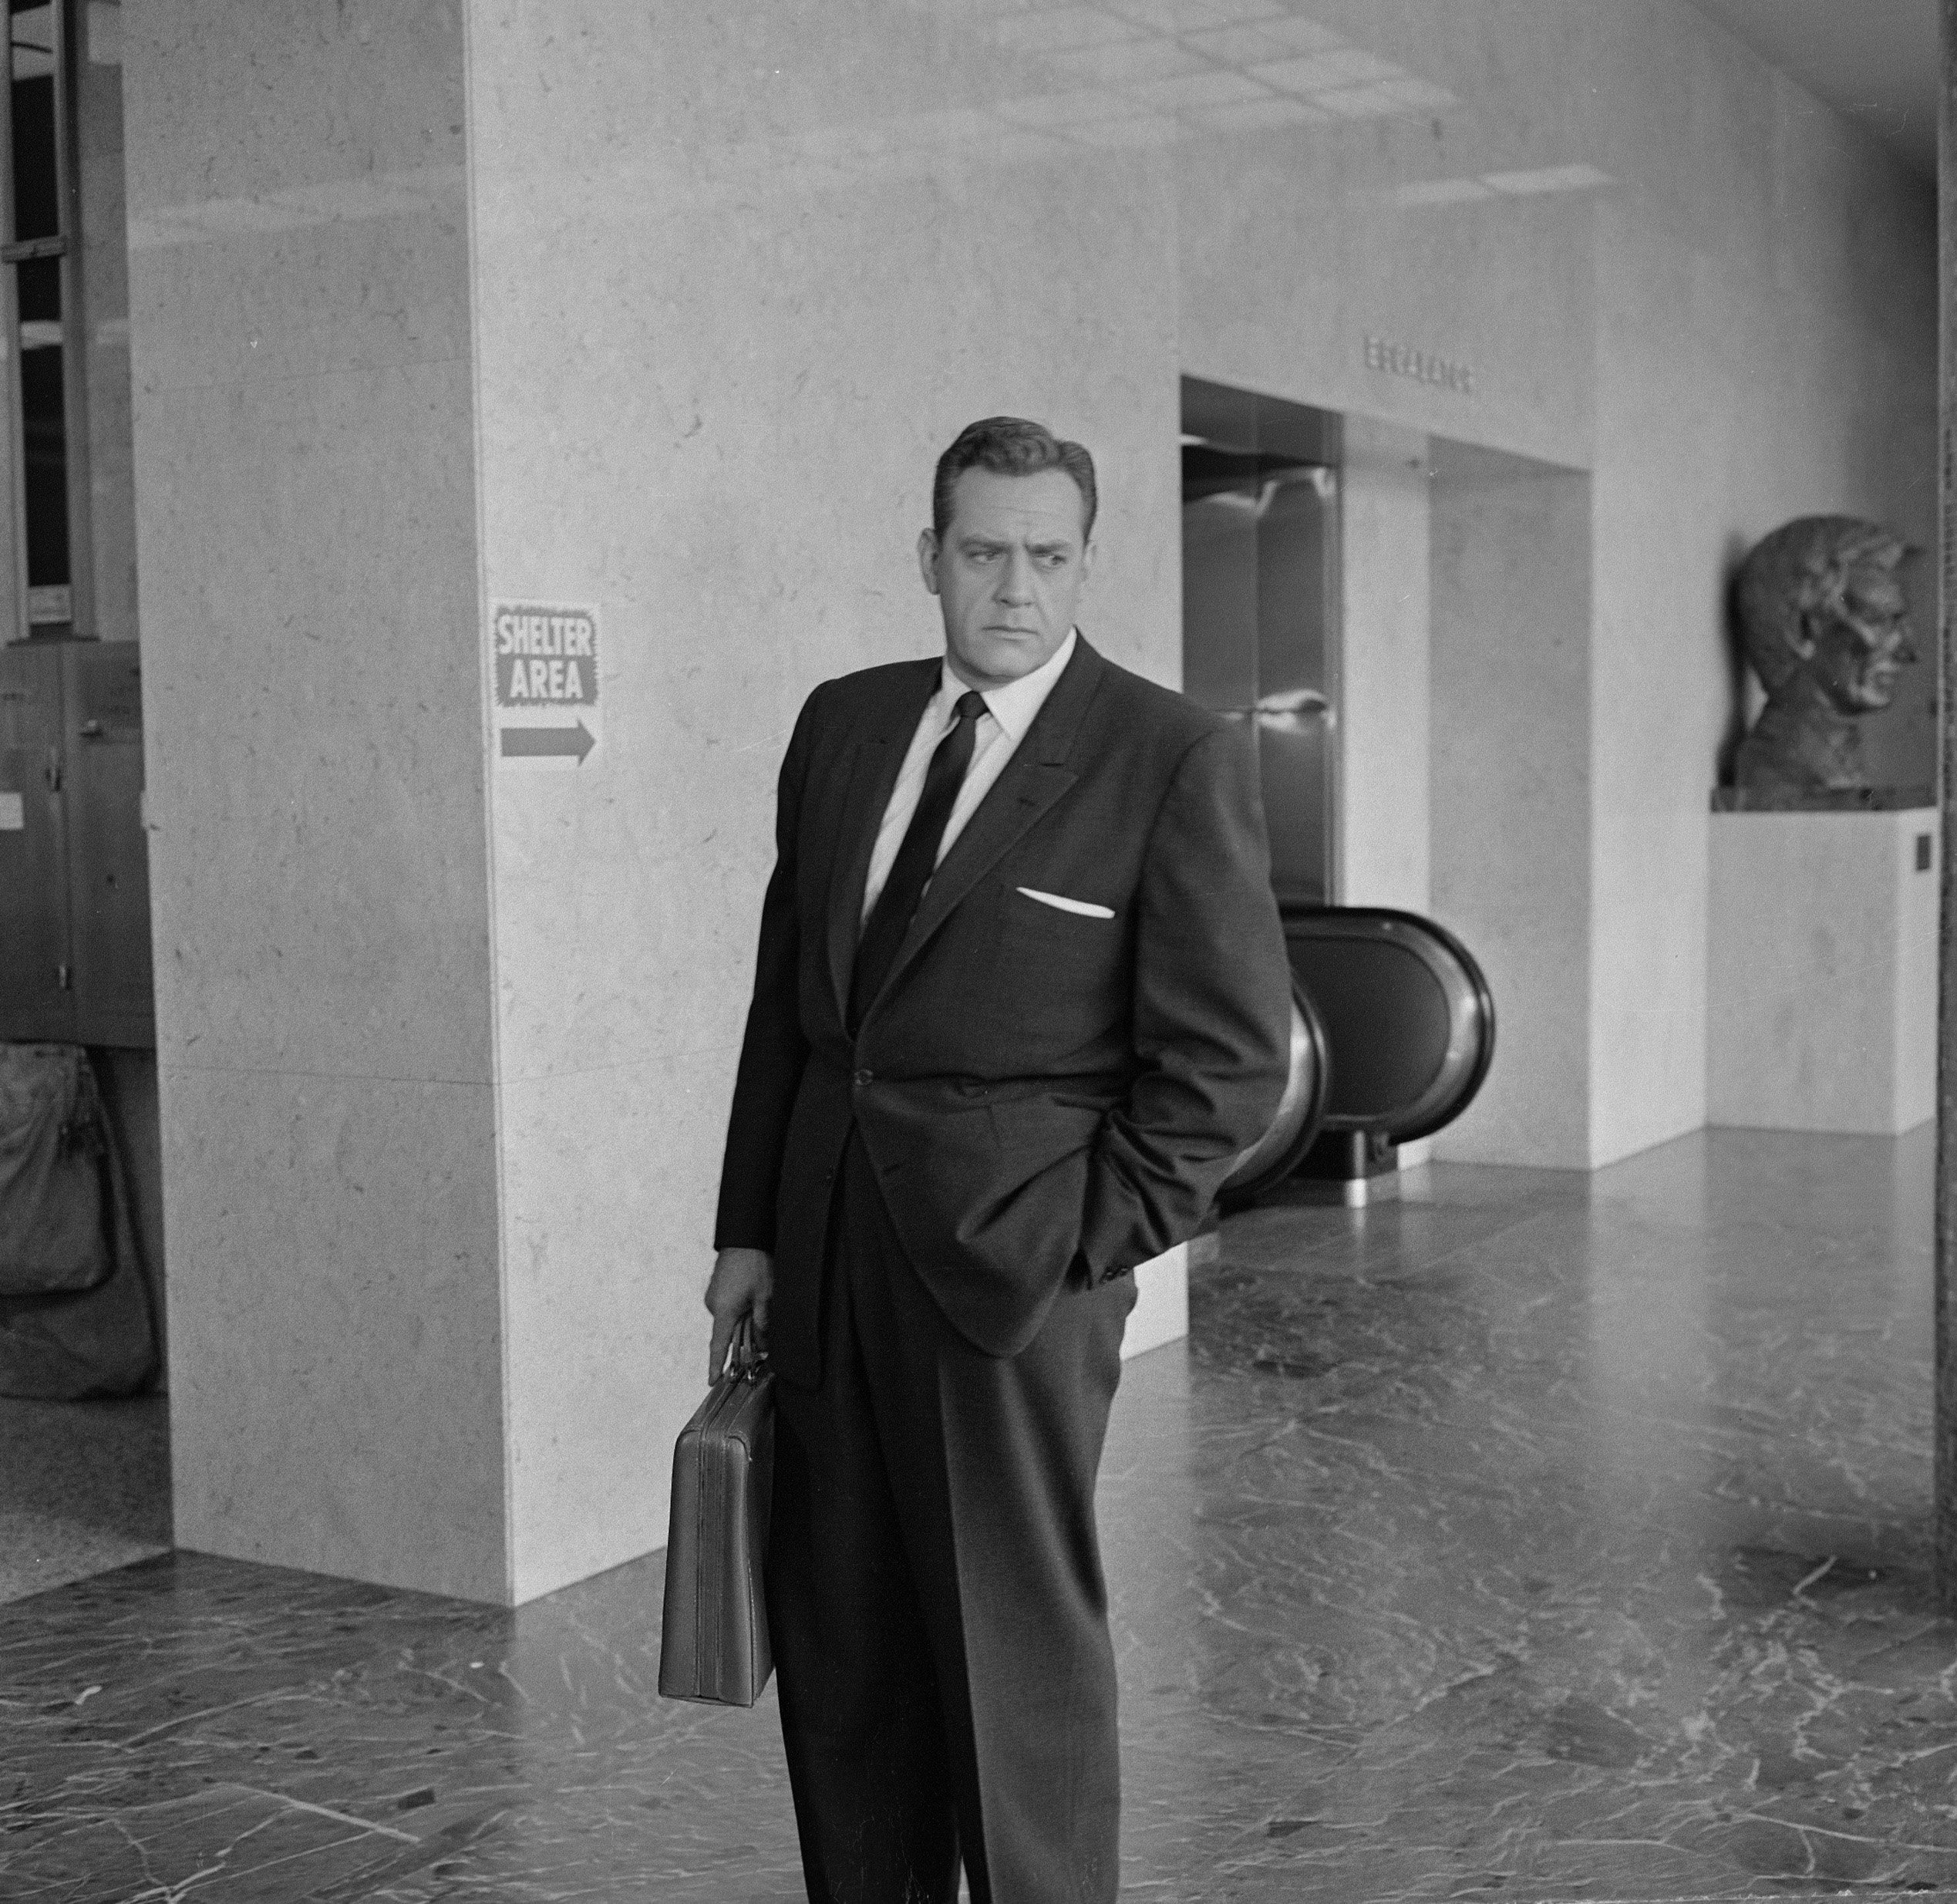 Raymond Burr as Perry Mason on location for the show PERRY MASON. Image dated August 3, 1962. | Source: Getty Images